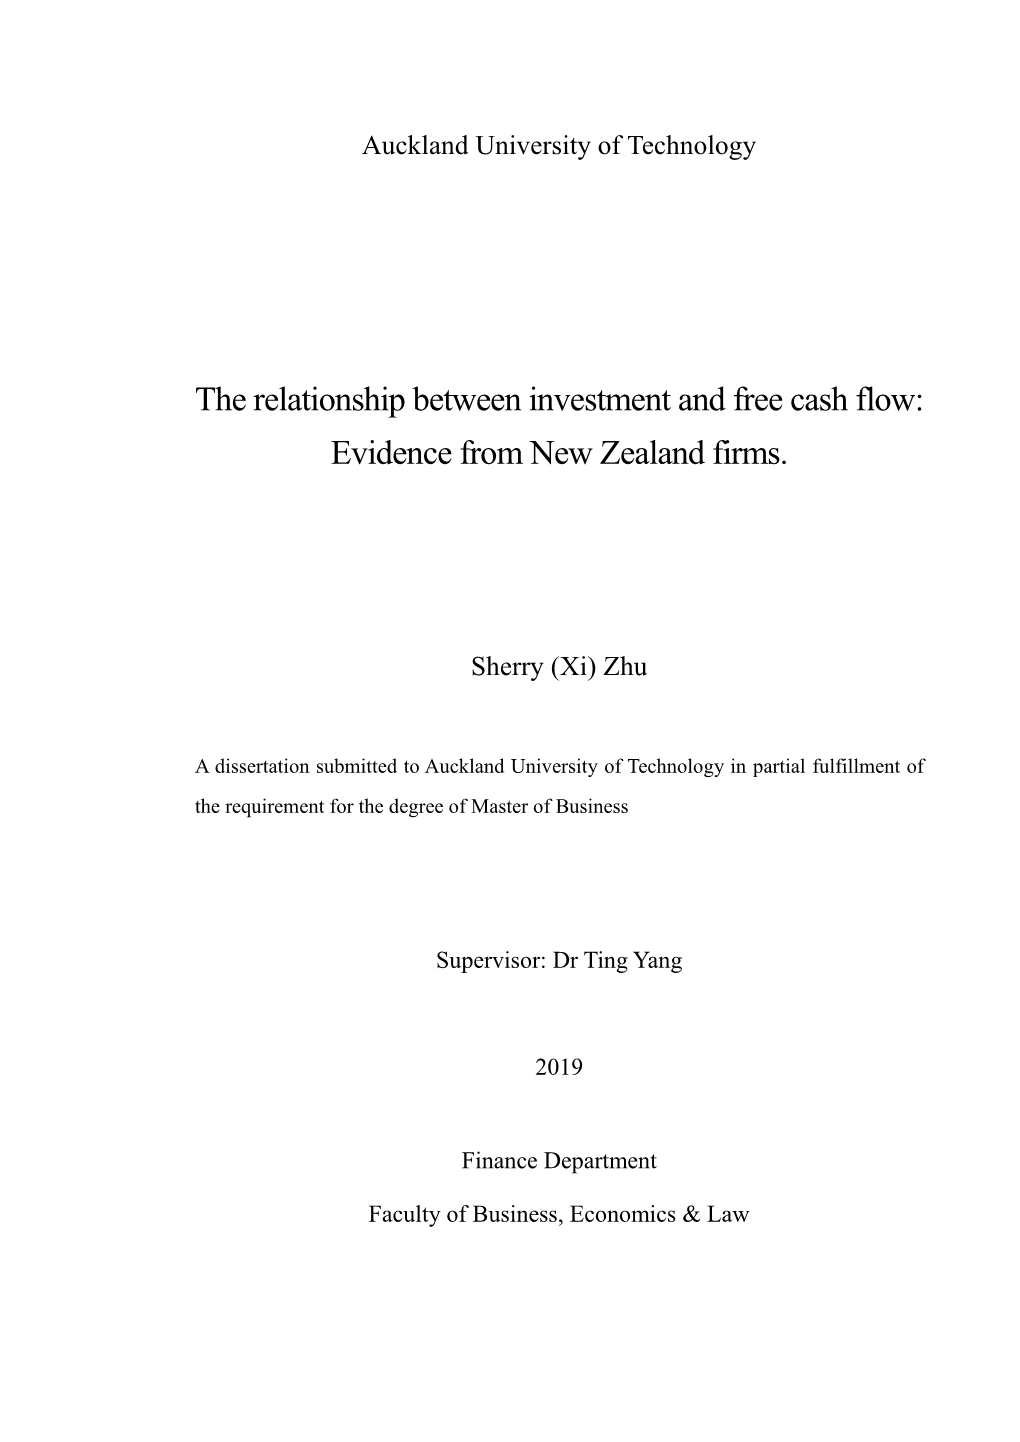 The Relationship Between Investment and Free Cash Flow: Evidence from New Zealand Firms